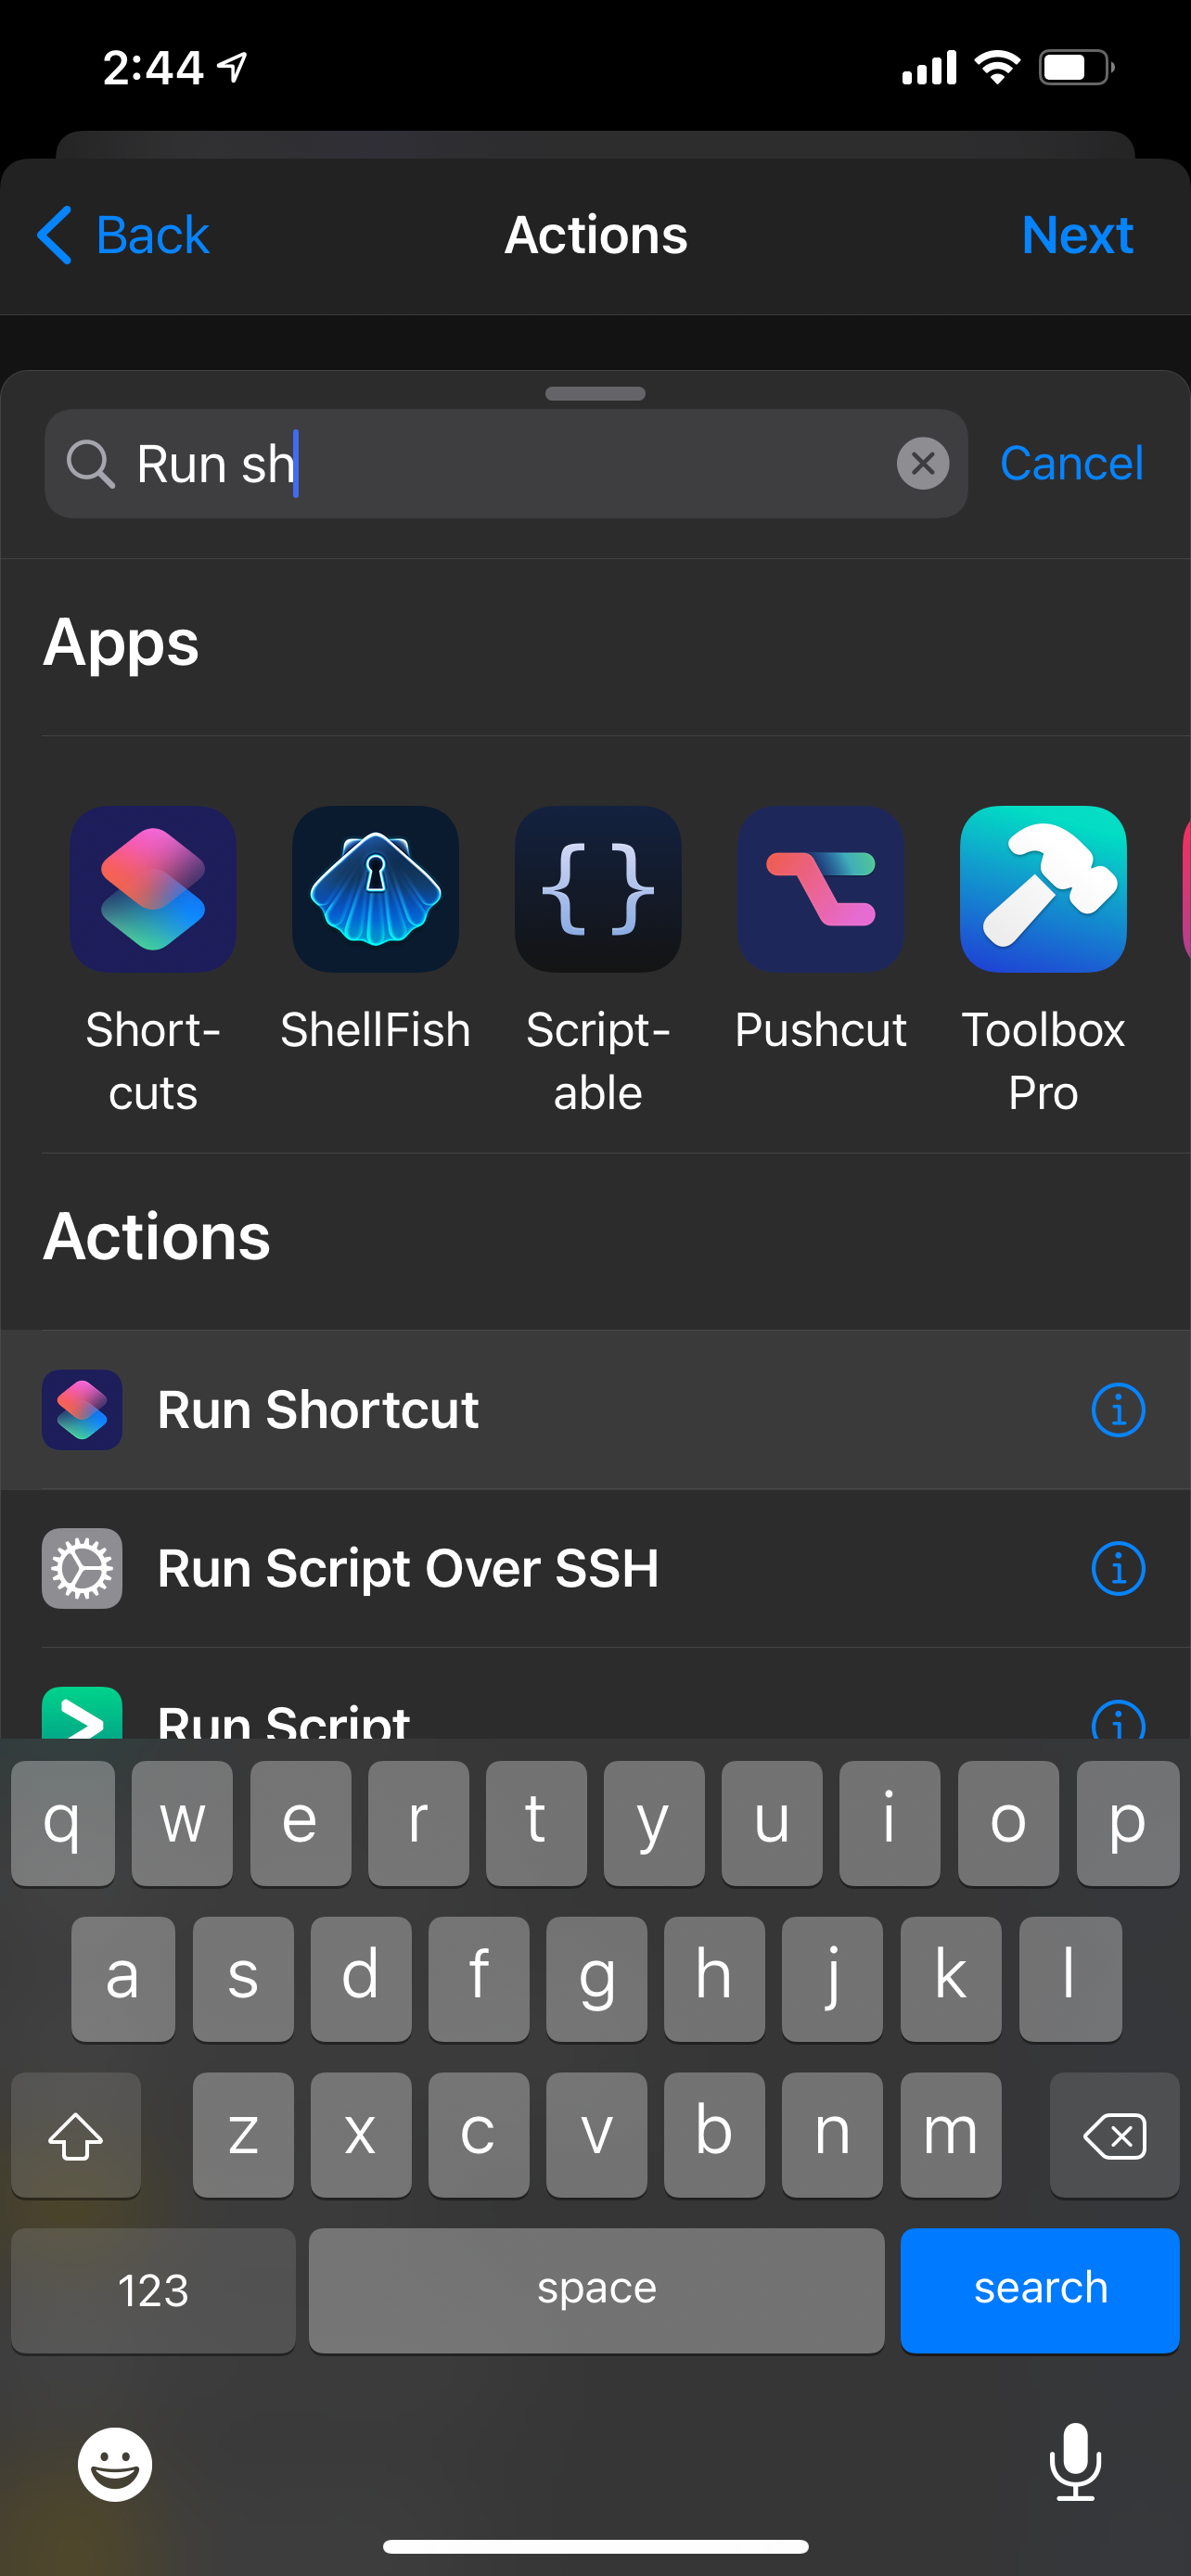 Run shortcut action in search results